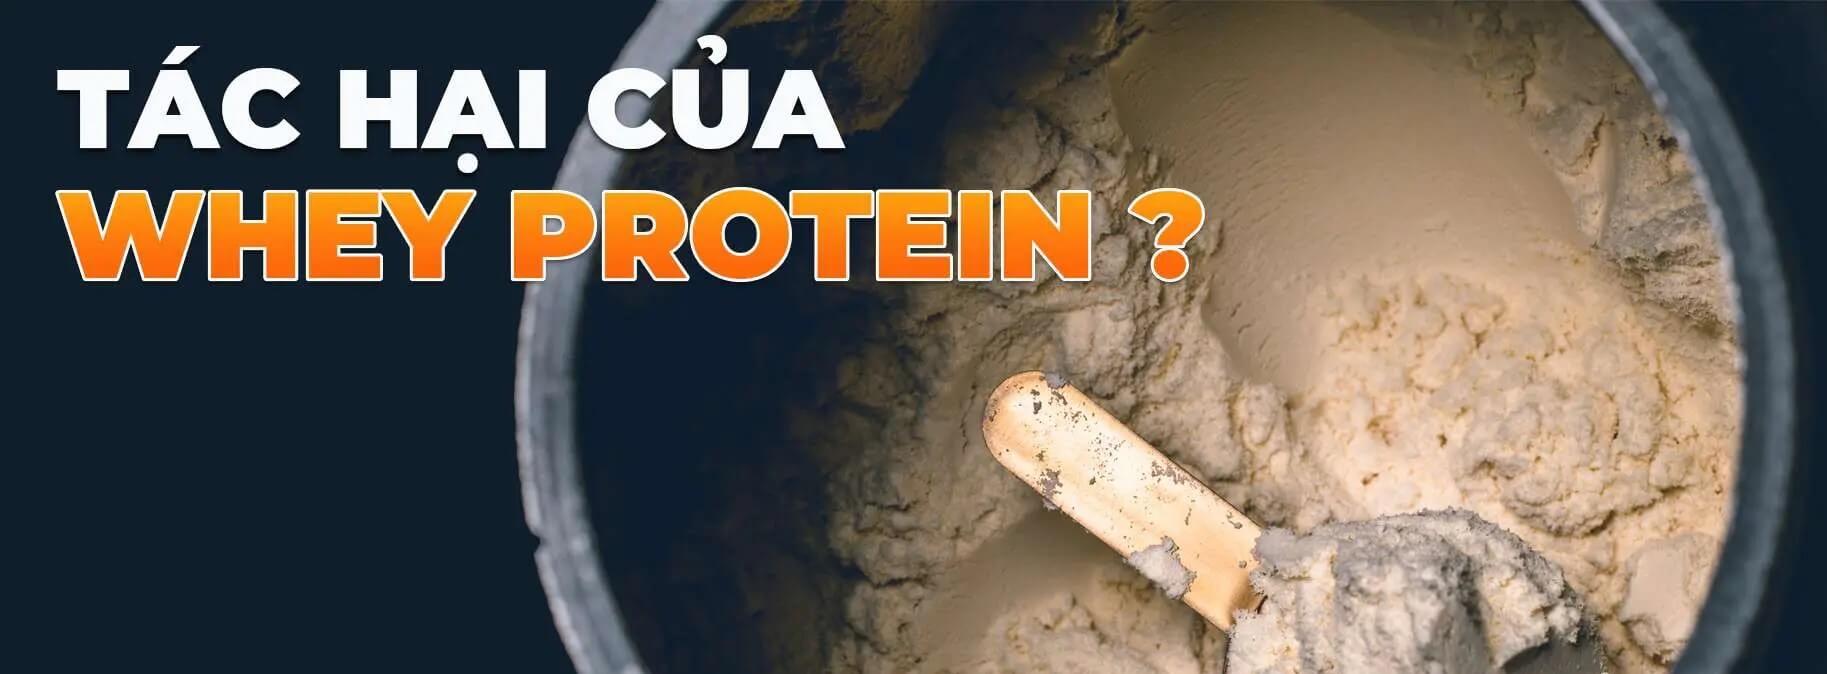 Tác hại của whey protein